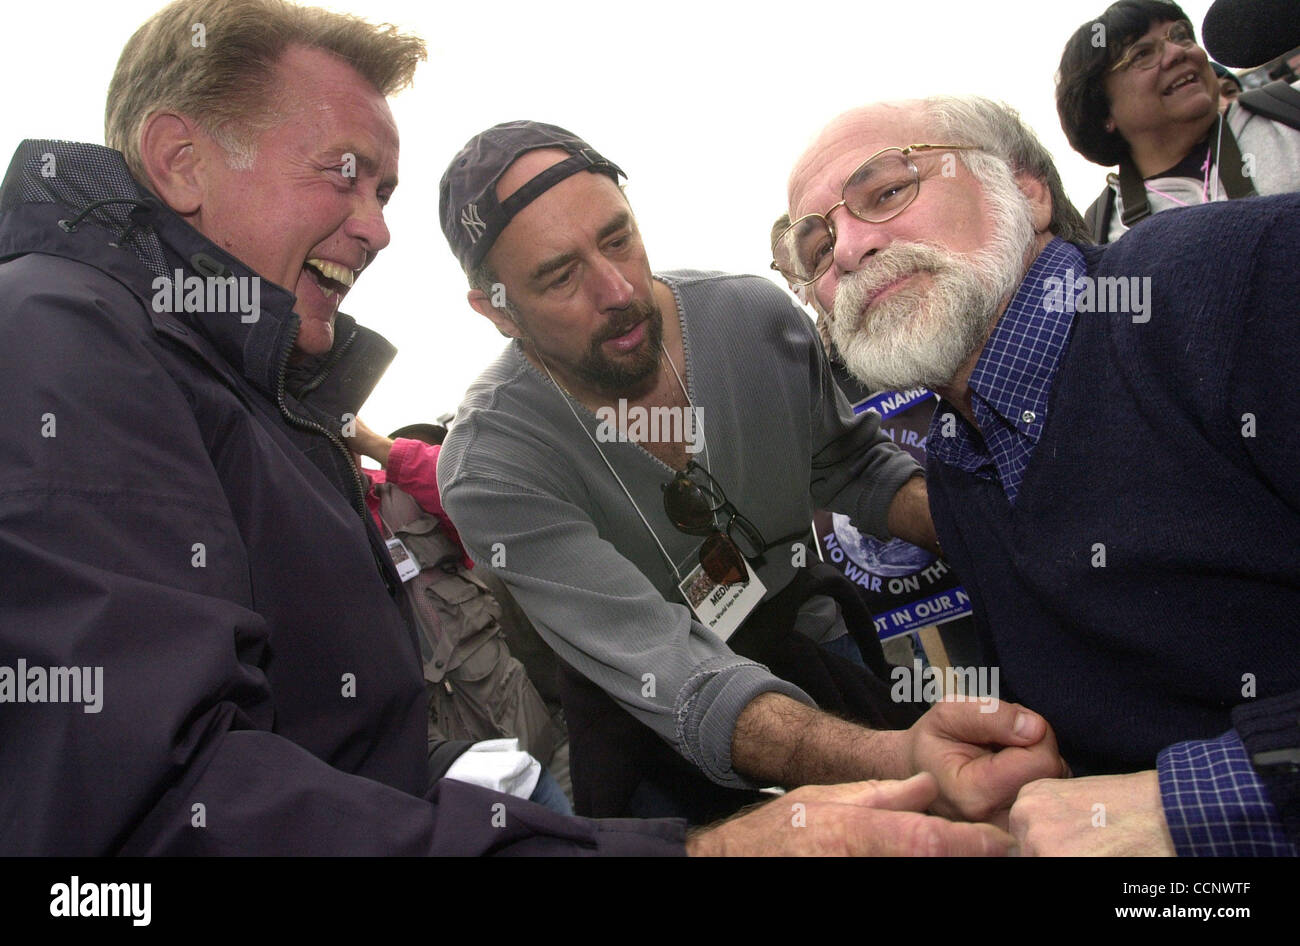 Feb 15, 2003; Hollywood, CA, USA; Television president Actor MARTIN SHEEN from NBC's West Wing and co-star RICHARD SCHIFF meet Vietnam War Veteran and activist RON KOVICH during an anti war protest in Hollywood. Stock Photo